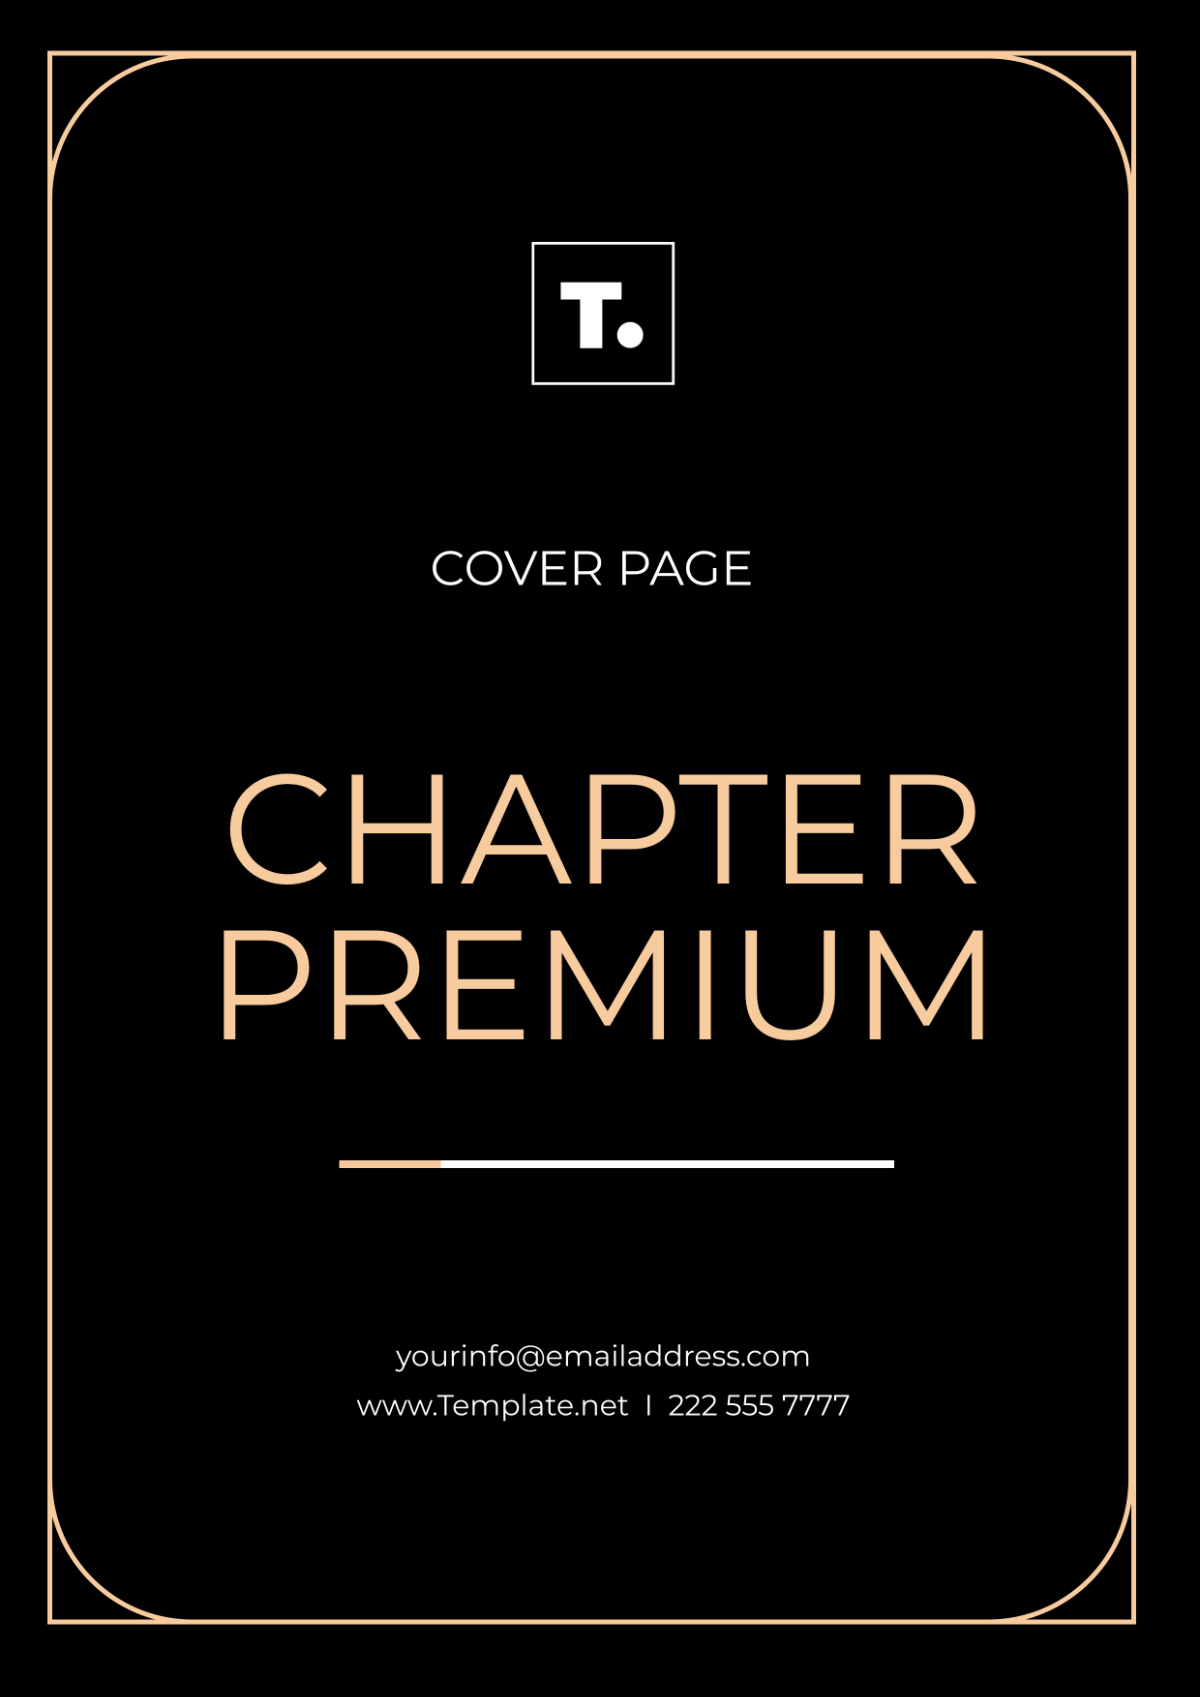 Chapter Premium Cover Page